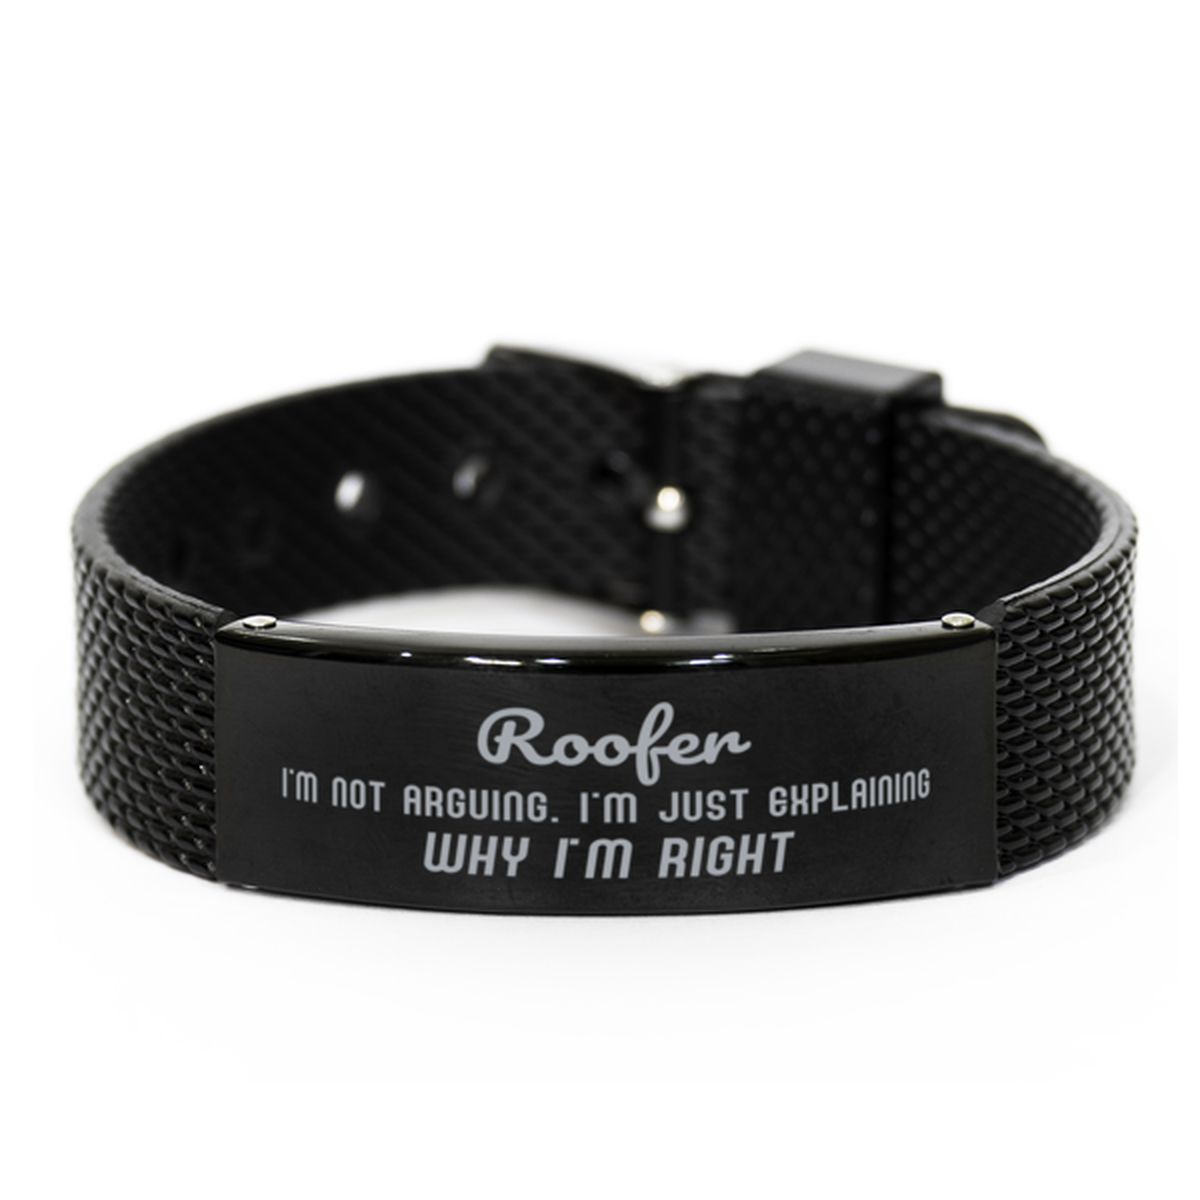 Roofer I'm not Arguing. I'm Just Explaining Why I'm RIGHT Black Shark Mesh Bracelet, Funny Saying Quote Roofer Gifts For Roofer Graduation Birthday Christmas Gifts for Men Women Coworker